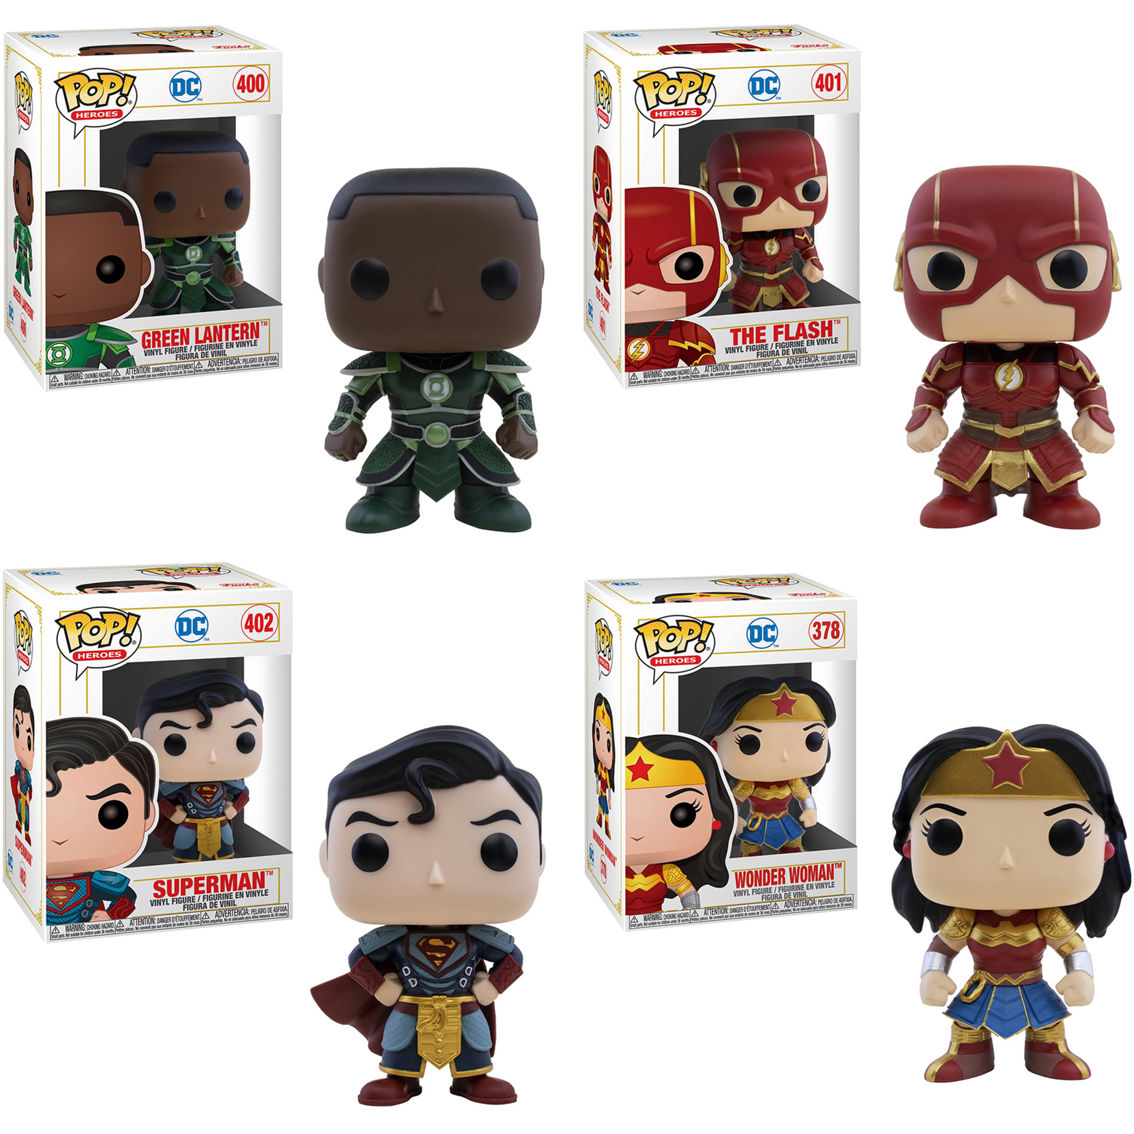 Funko POP! DC Heroes Imperial Palace Collector's Set - Image 7 of 7